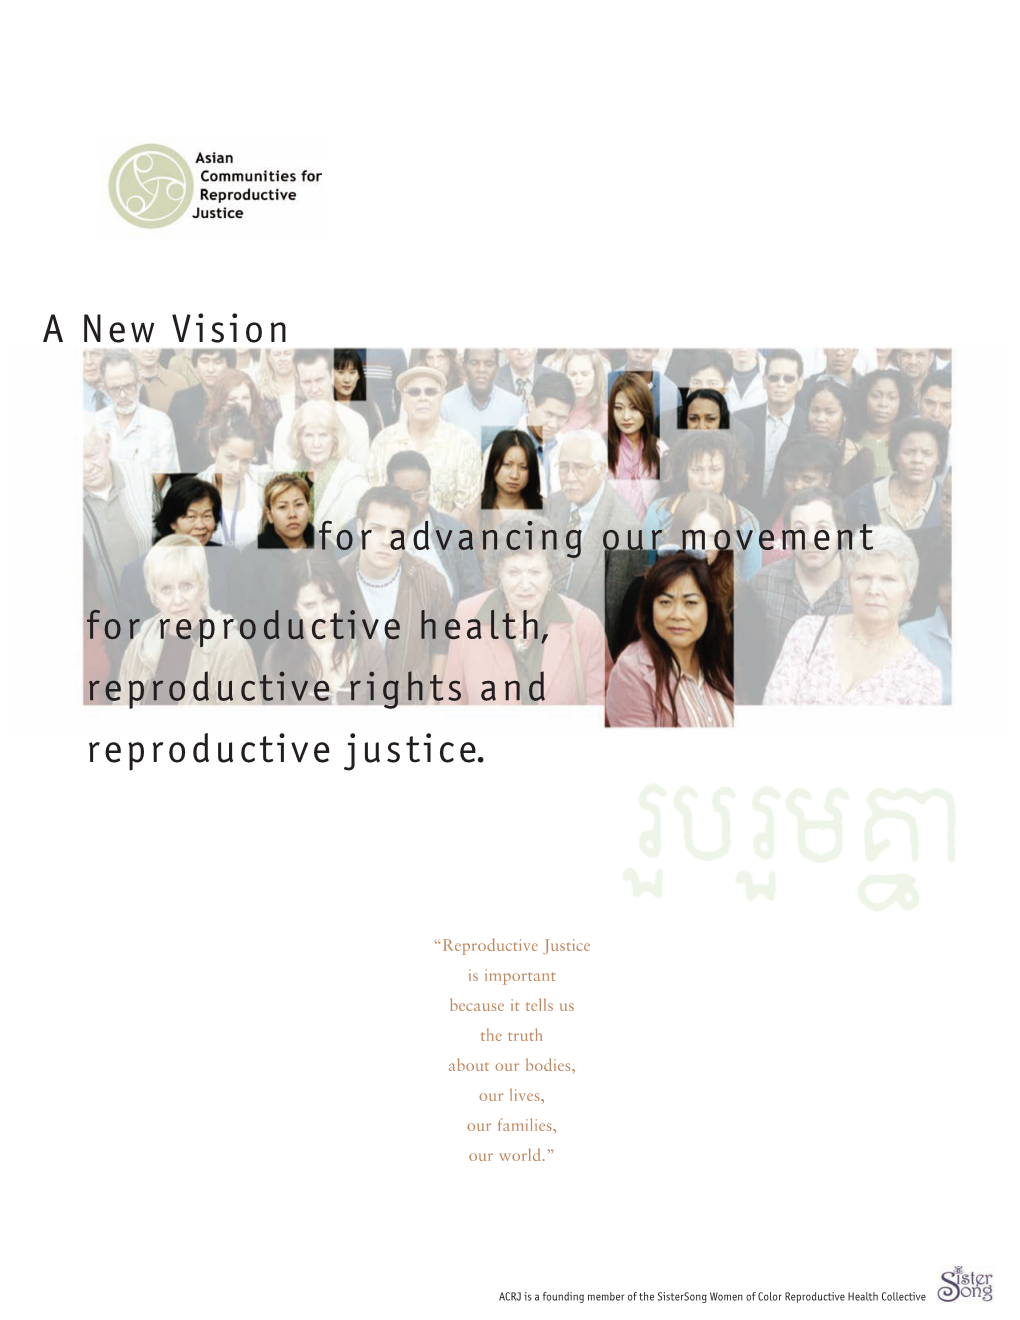 A New Vision for Advancing Our Movement for Reproductive Health